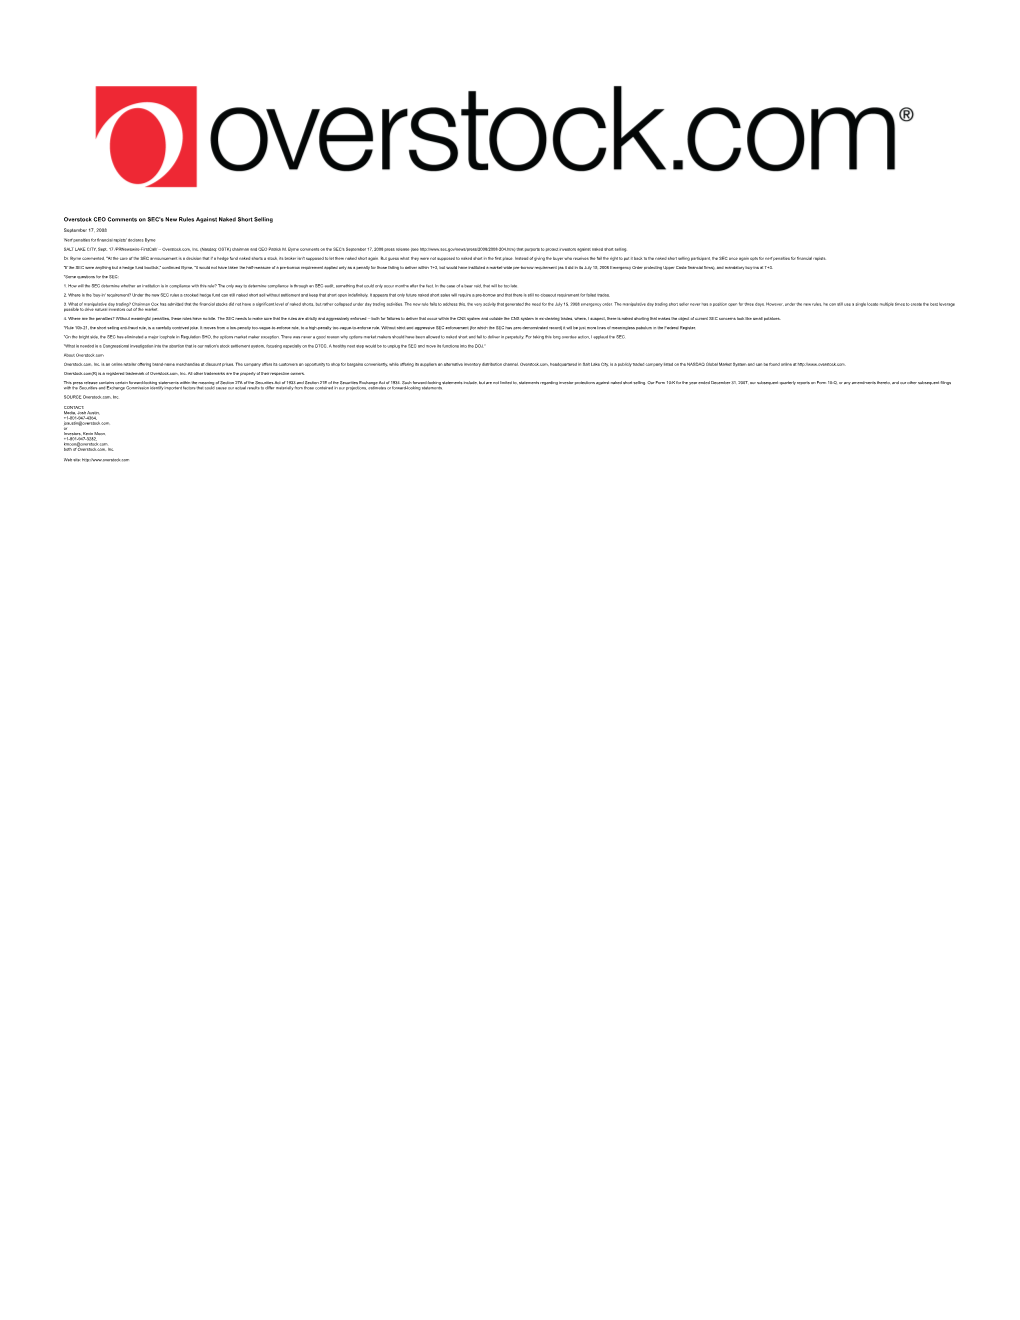 Overstock CEO Comments on SEC's New Rules Against Naked Short Selling